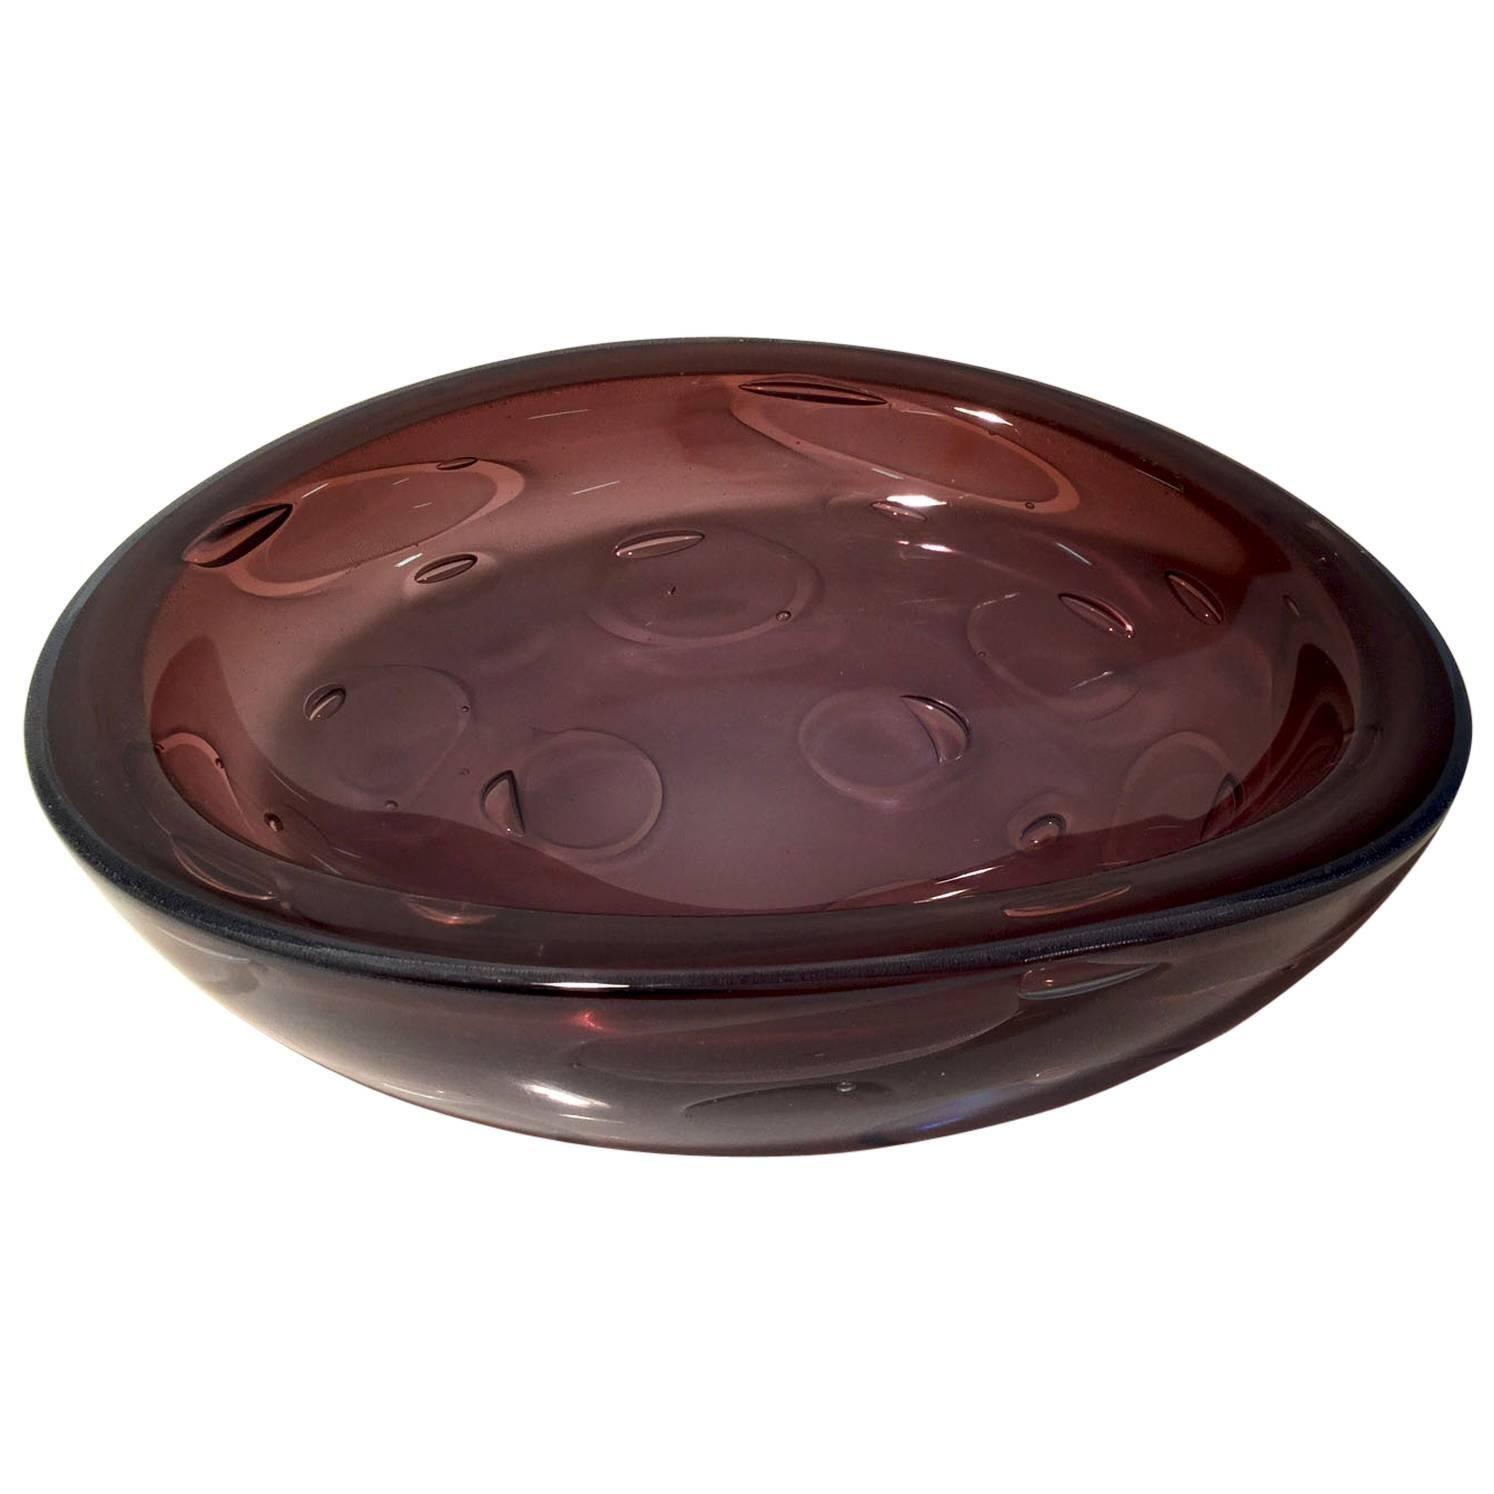 Beautiful Ashtray "Superbolle" 1942 by Ercole Barovier  For Sale